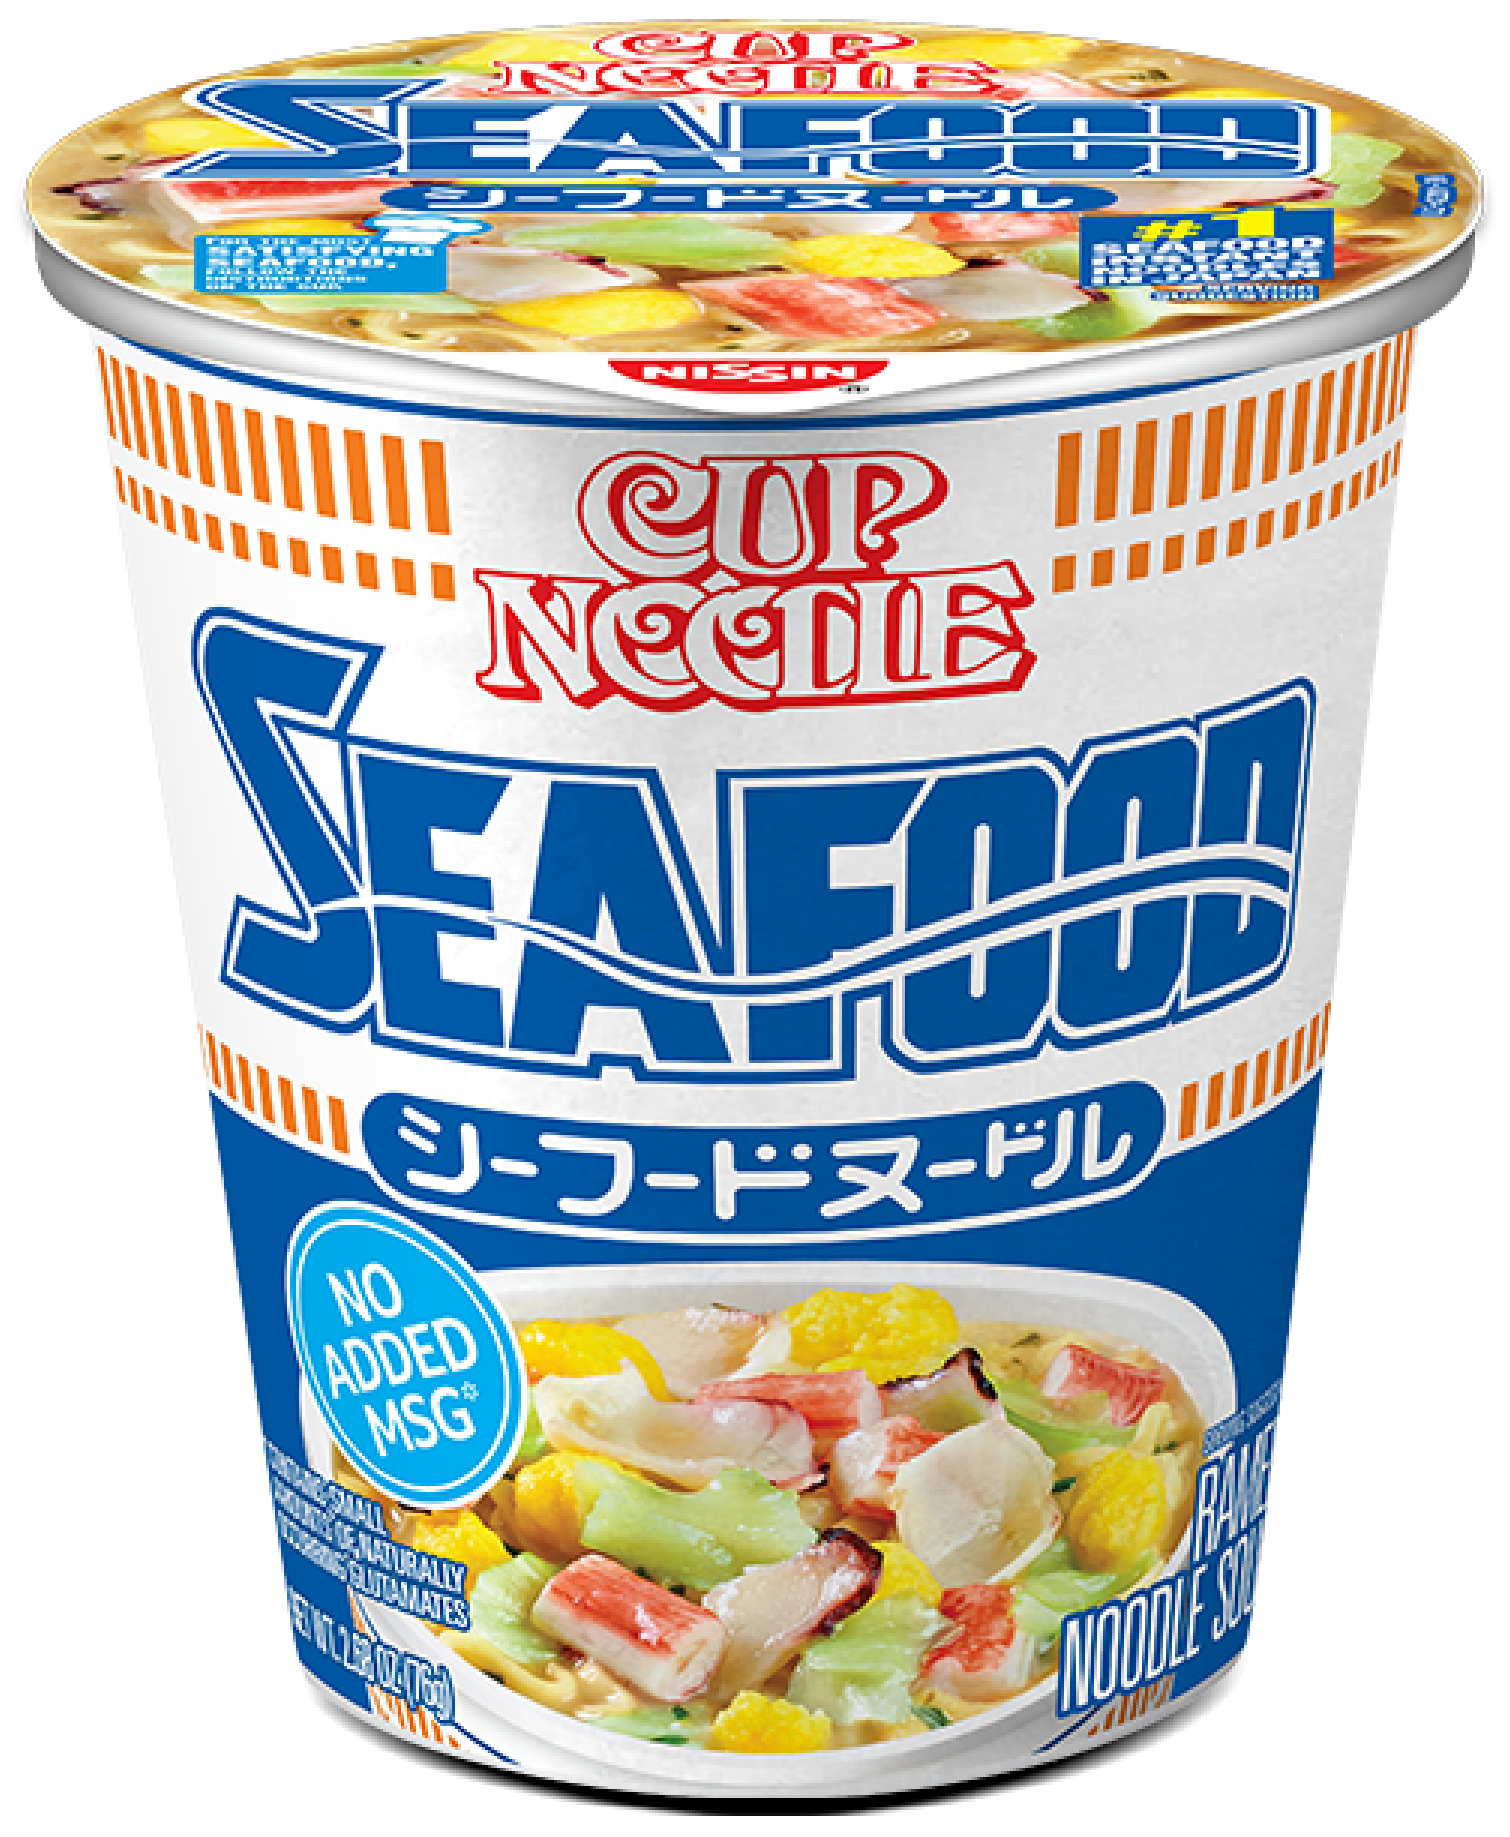 Recently here in Brazil, Nissin changed the ingredients of the vegetable  noodles and made it vegan, the flavor is great and my girlfriend and I eat  it almost every day. : r/vegan